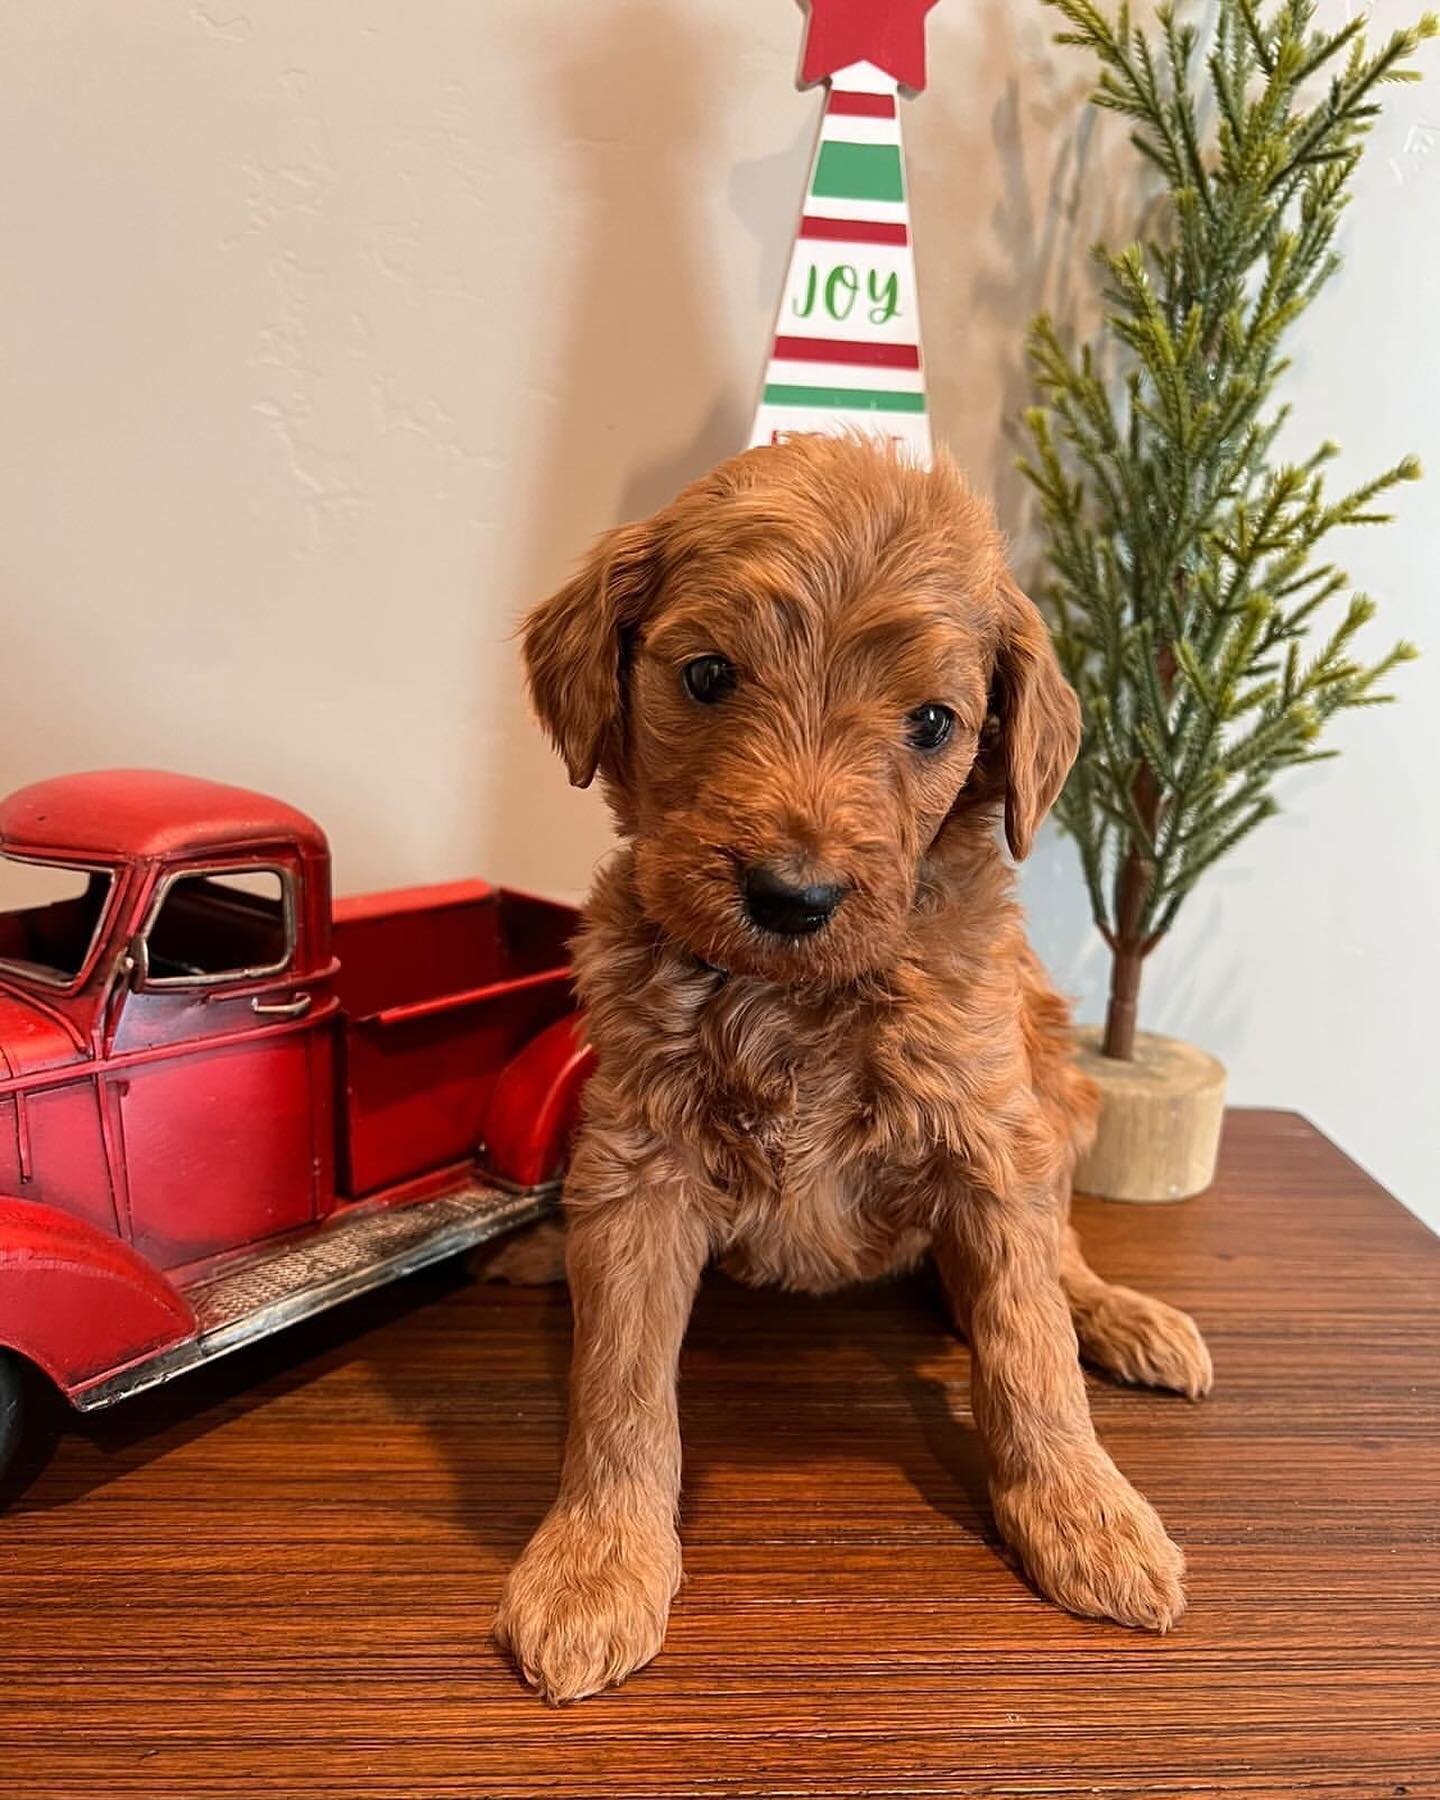 Standards Available 💚🤍❤️ We have 4 of the cutest Standard Goldendoodles available 😍 All are boys, I can send you videos. They are ready to go home in 2.5 weeks 🙌🏻 #utahgoldendoodles #standardgoldendoodle #puppies #merrychristmas #goldendoodlepup